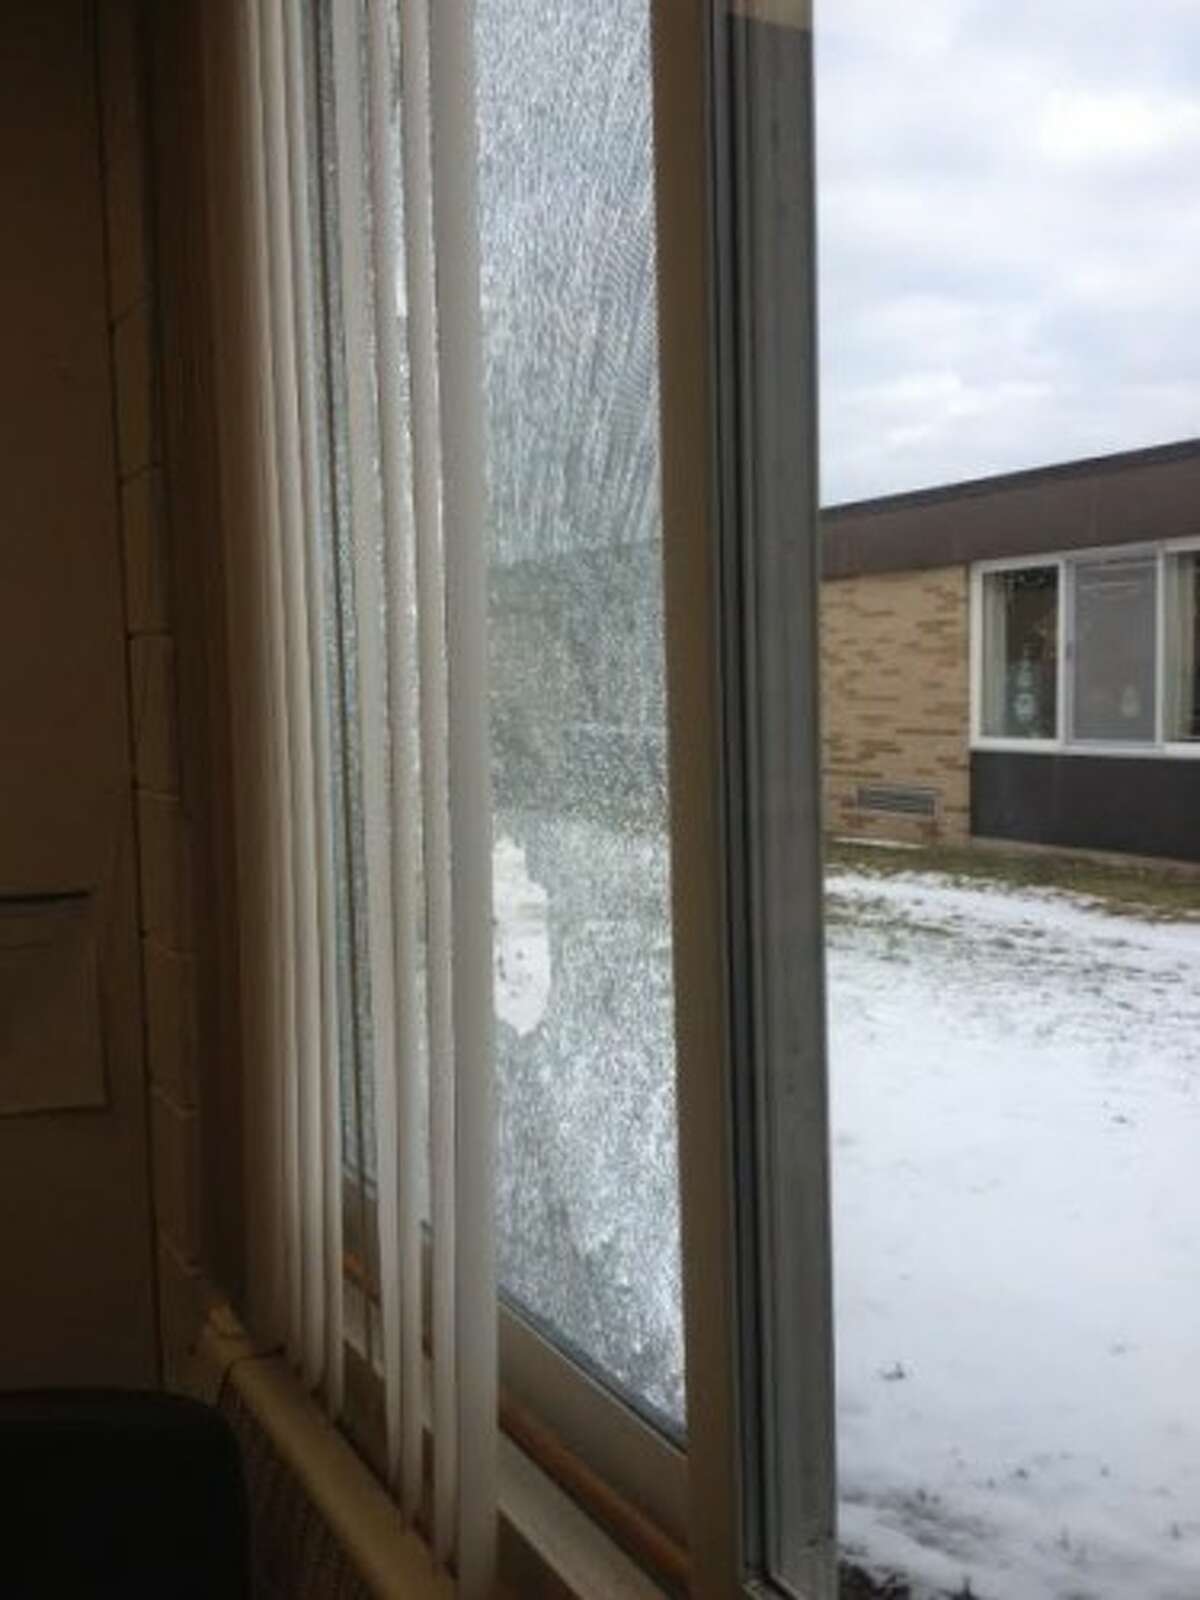 Four windows were shot out of Evart Elementary School during Thanksgiving break. Police are seeking information about the shooters. (Courtesy photo)